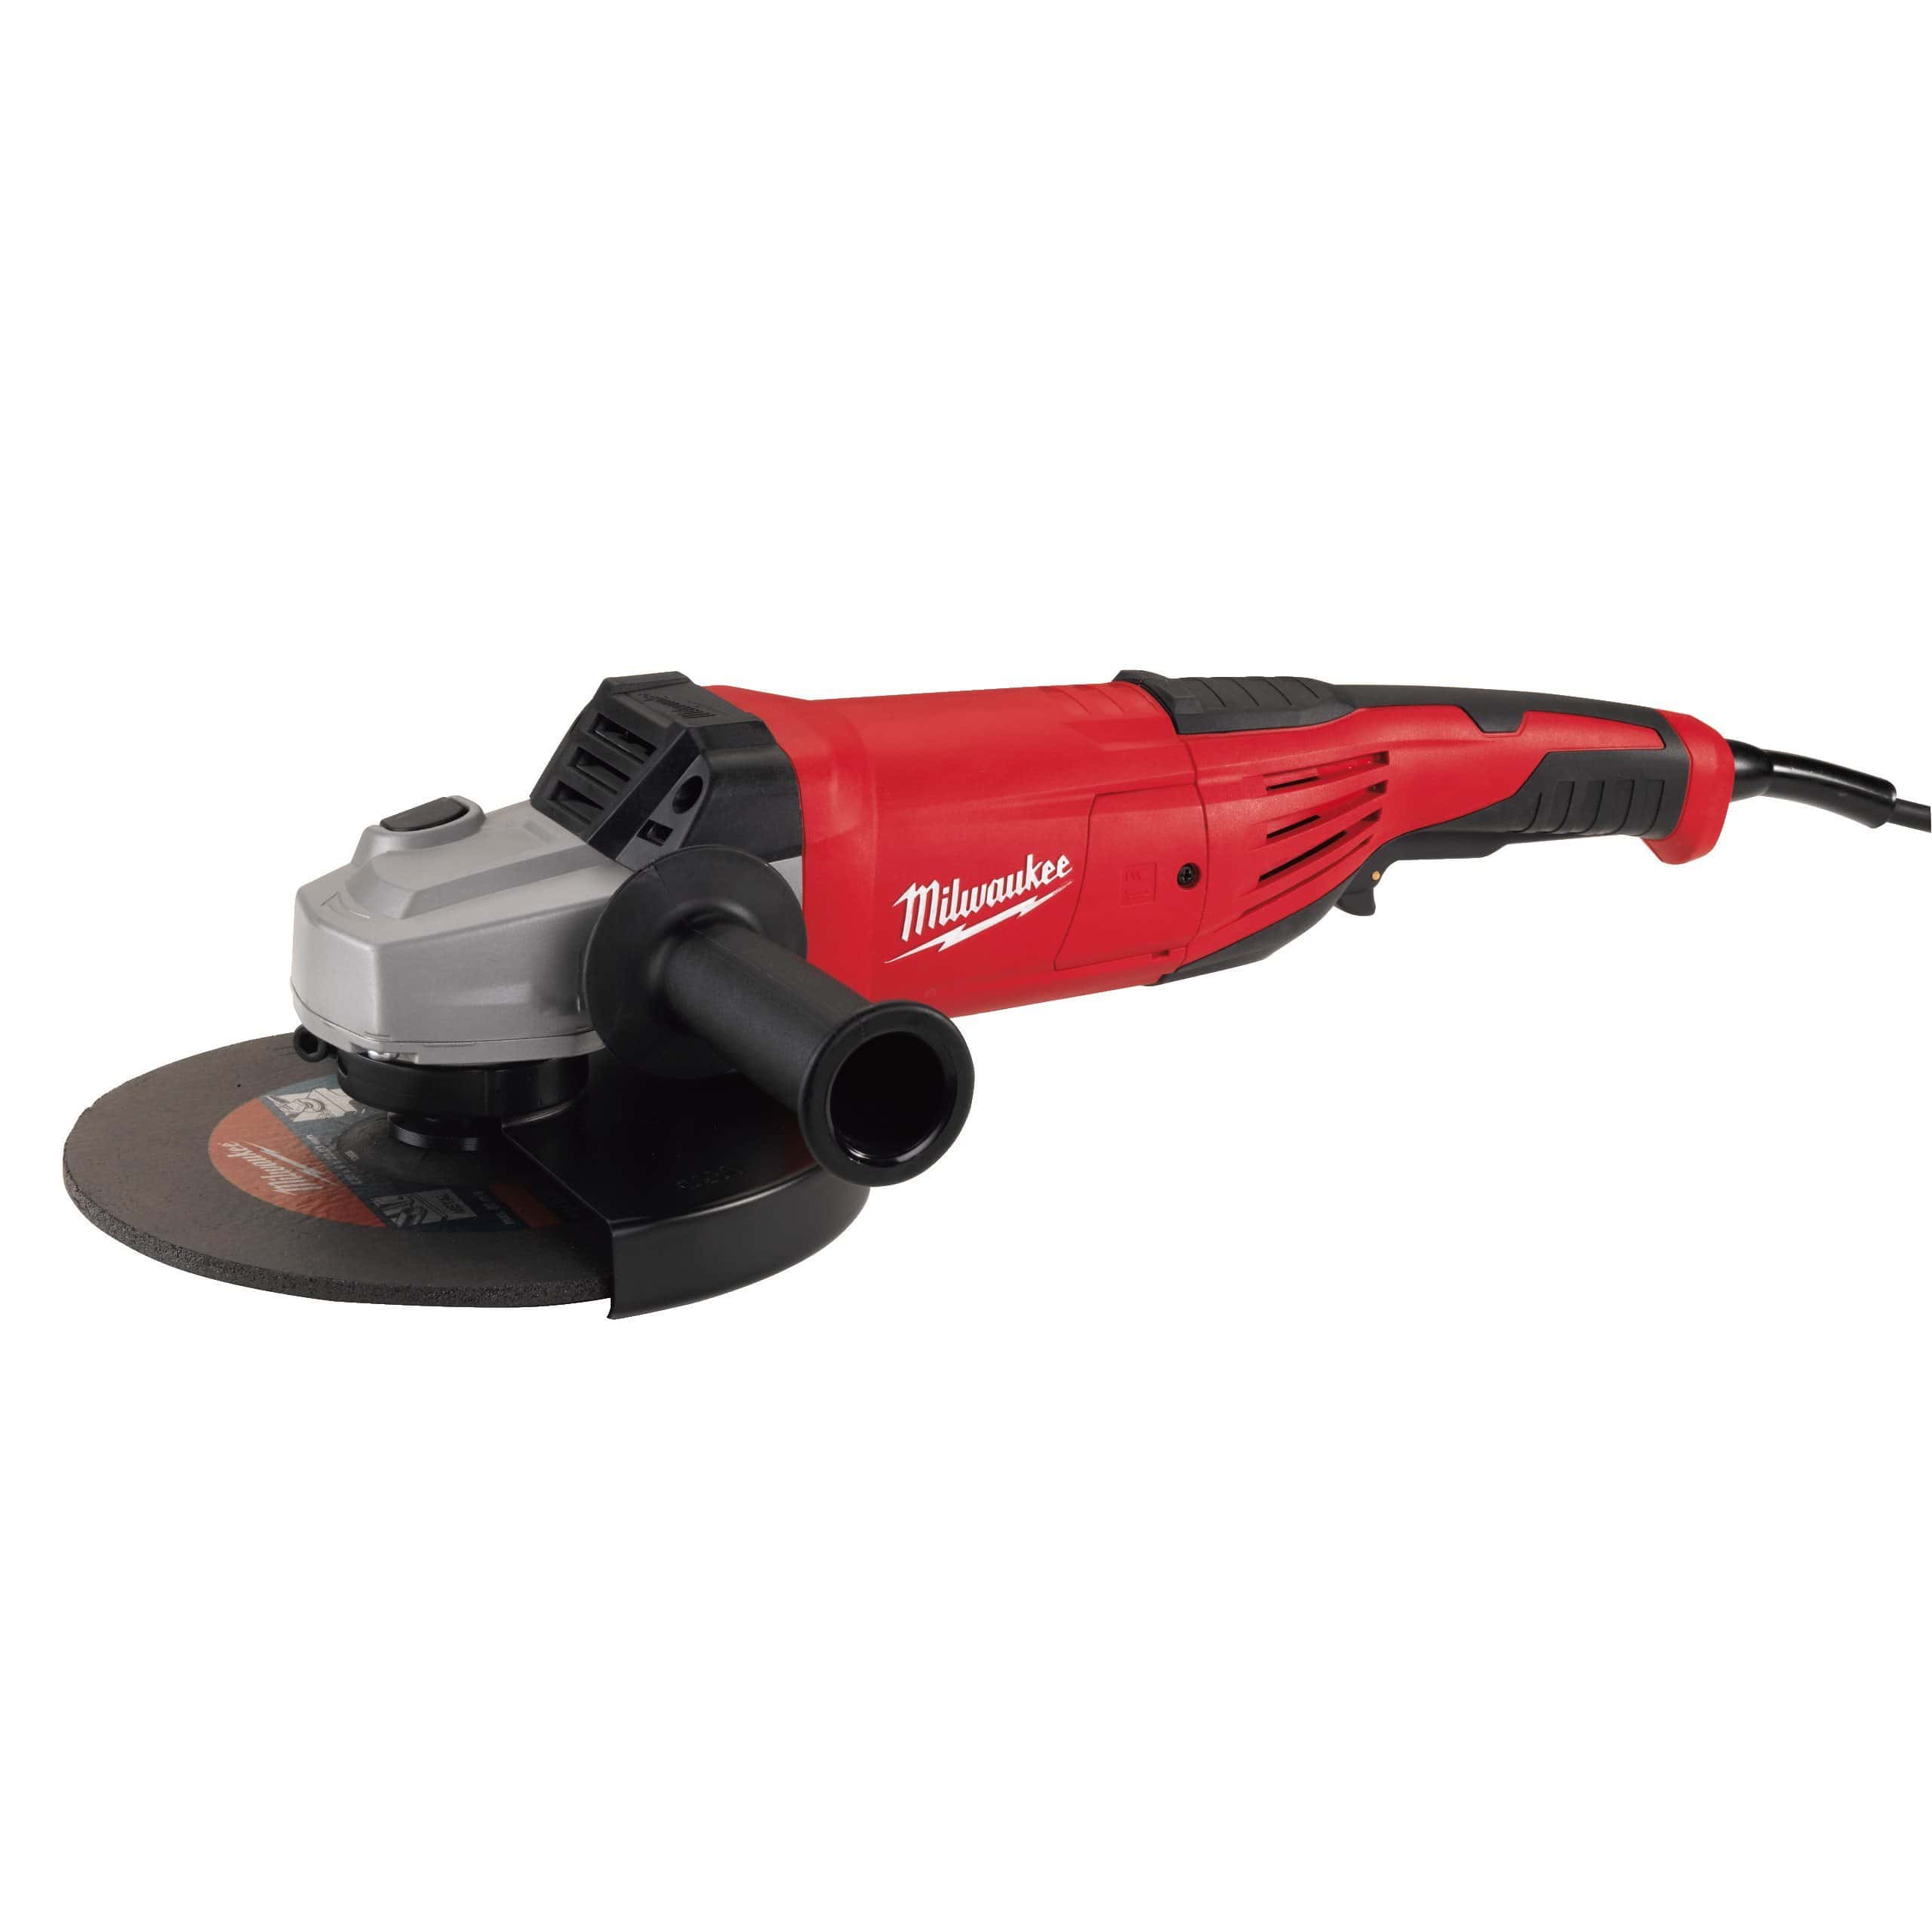 Milwaukee Angle Grinder 230mm 2200W - AG 22-230 DMS | Supply Master | Accra, Ghana Tools Building Steel Engineering Hardware tool